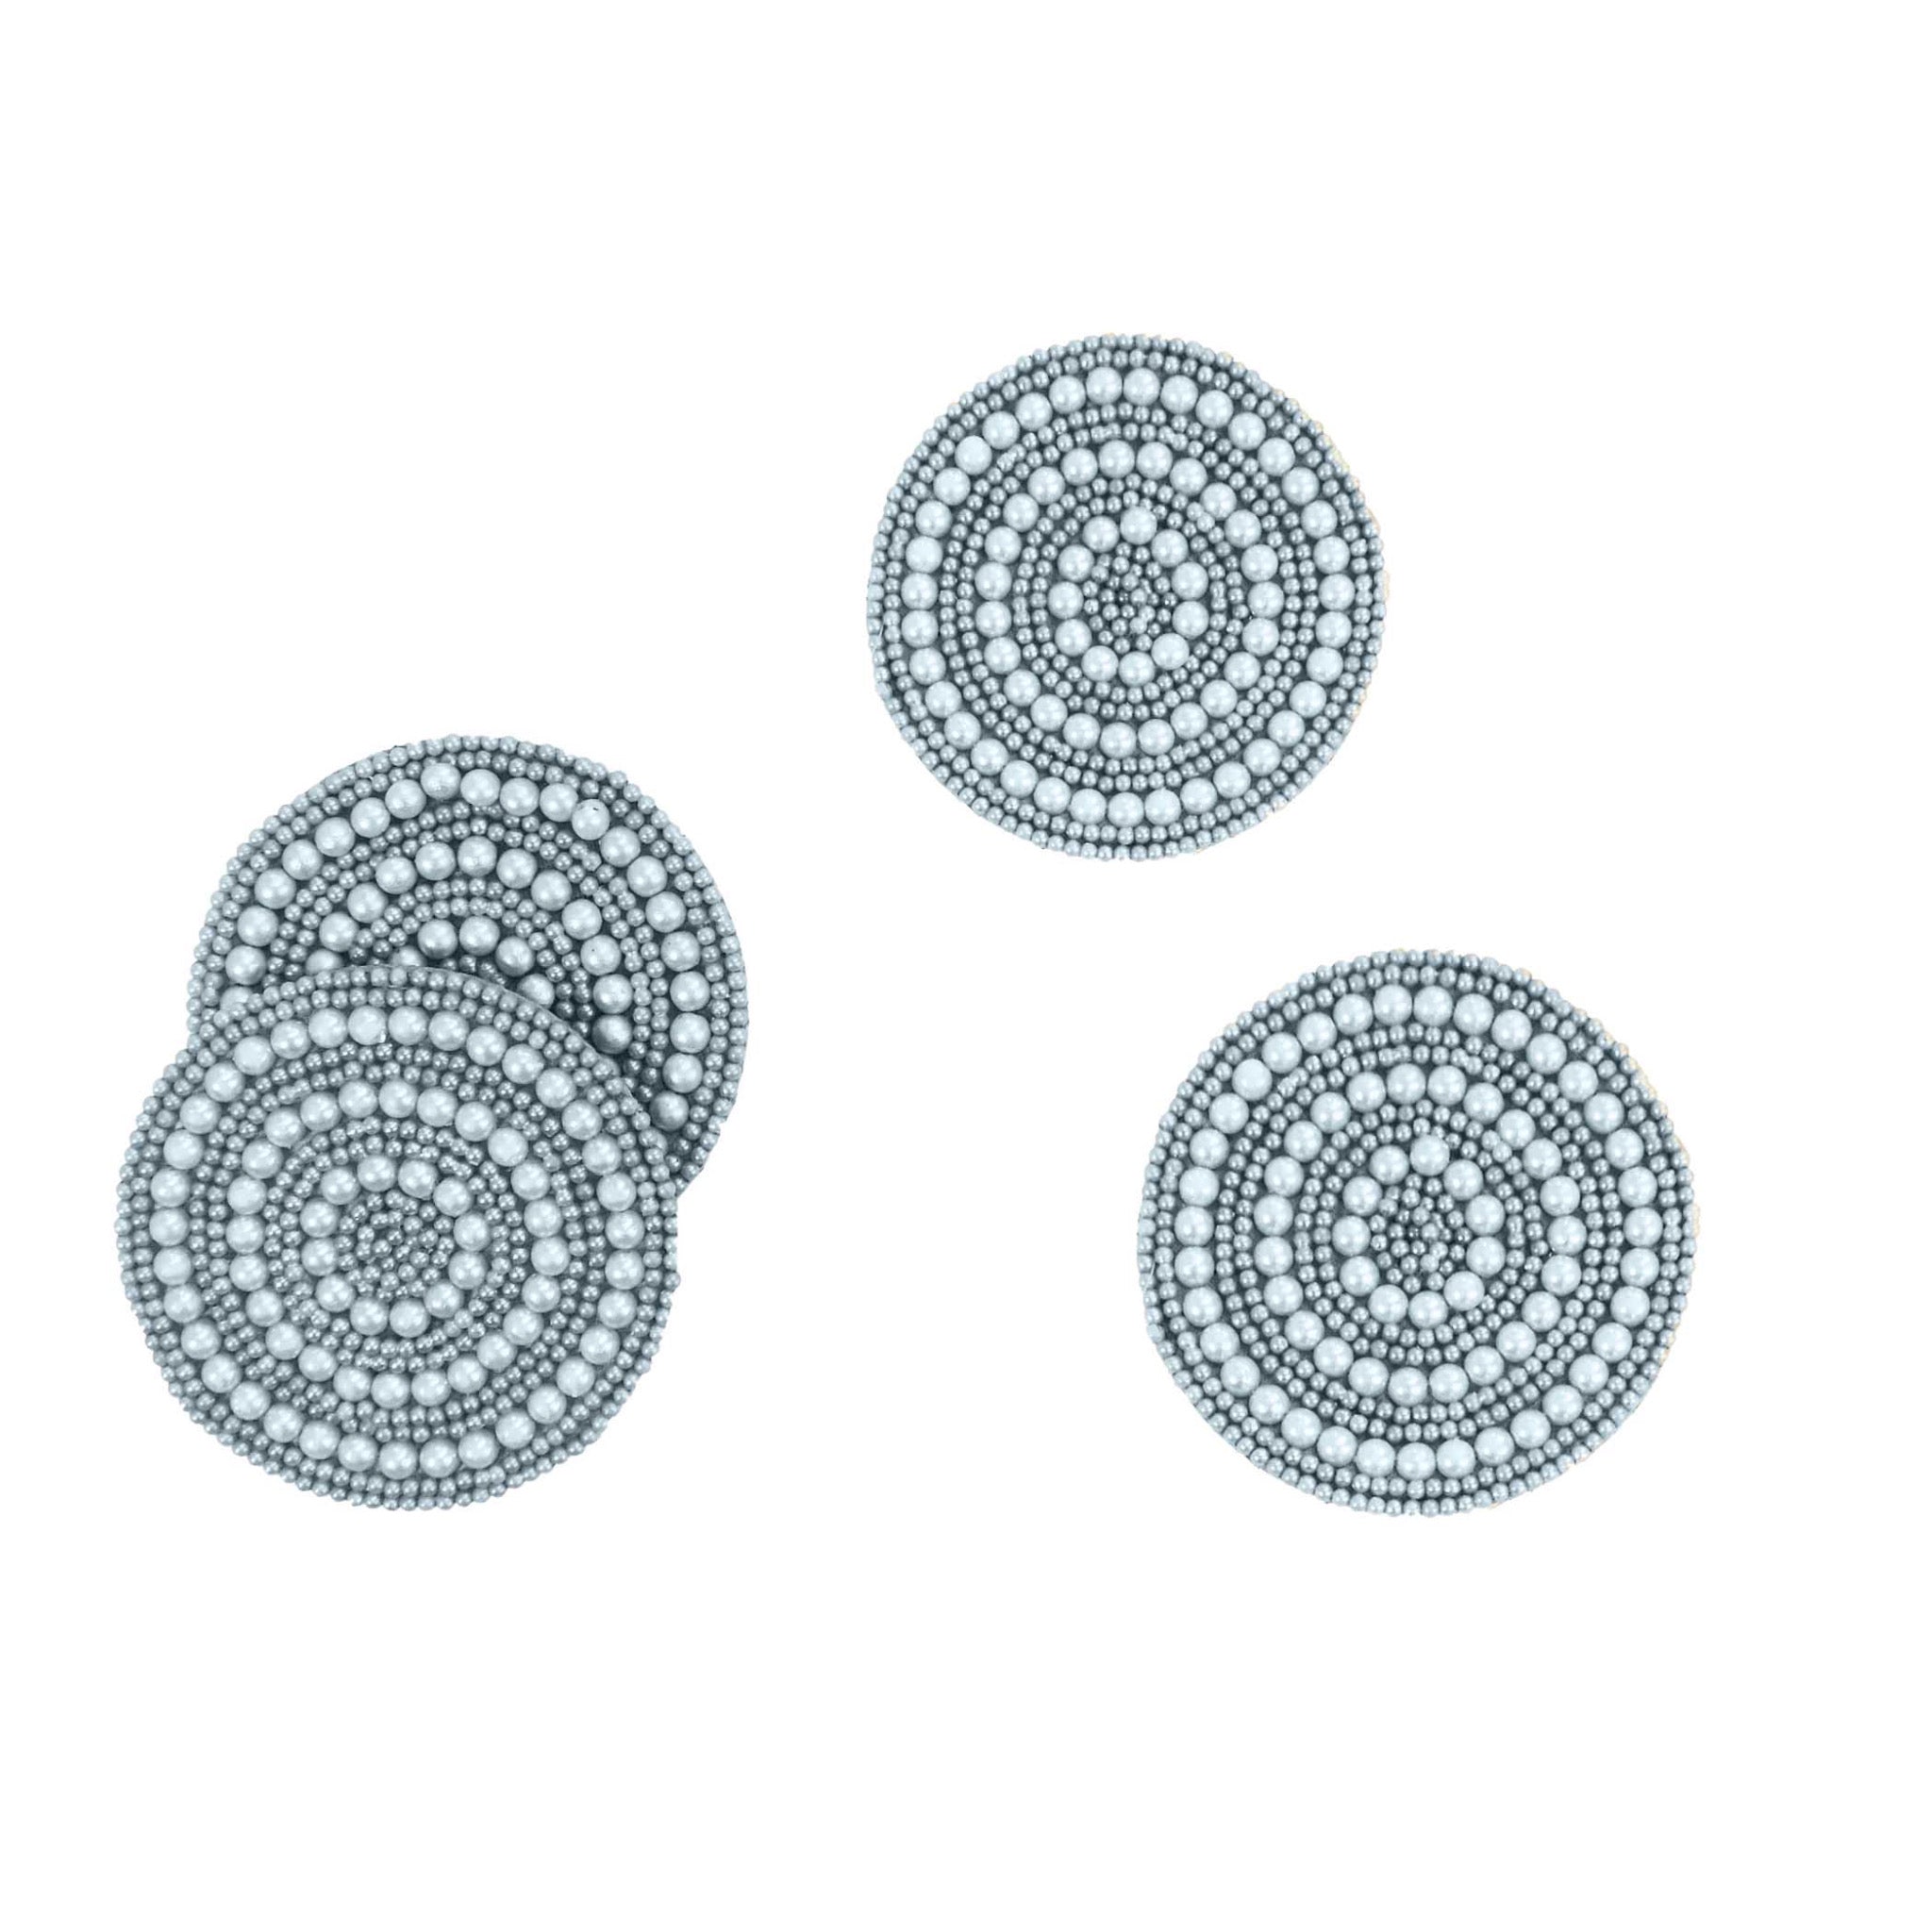 Full Circle Embroidered Coaster in Light Blue, Set of 4